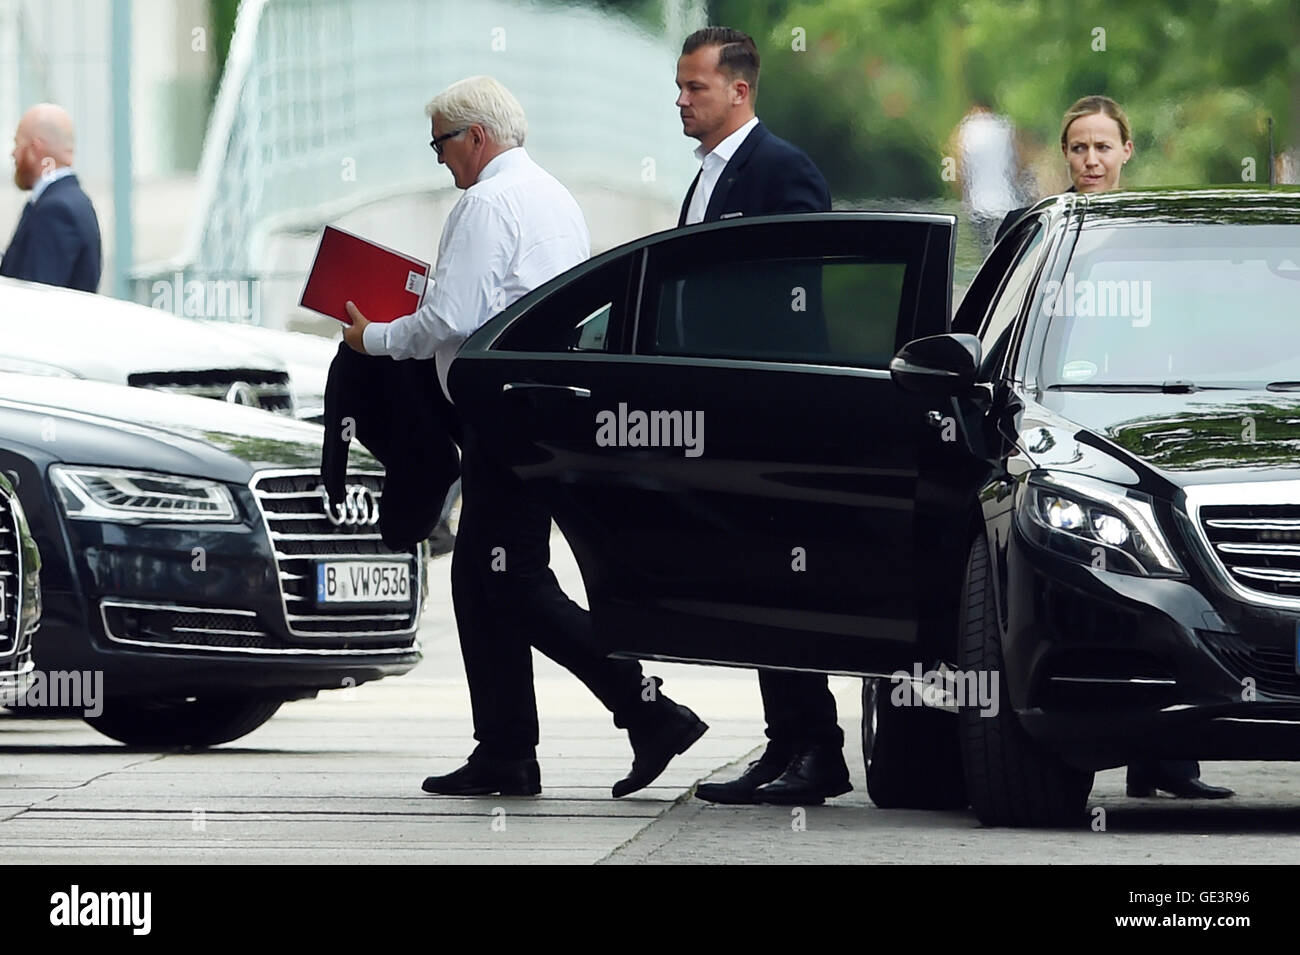 Berlin, Germany. 23rd July, 2016. Foreign Minister Frank-Walter Steinmeier (m, SPD) arrives for emergency talks on the security situation at the federal chancellery in Berlin, Germany, 23 July 2016. After an attack in Munich interior minister de Maizière (CDU) has ordered flags at half-mast throughout Germany. An 18-year-old German-Iranian had killed nine people and himself in Munich on Friday evening. The background and motive of the attack remain unclear. PHOTO: Maurizio Gambarini/dpa/Alamy Live News Stock Photo